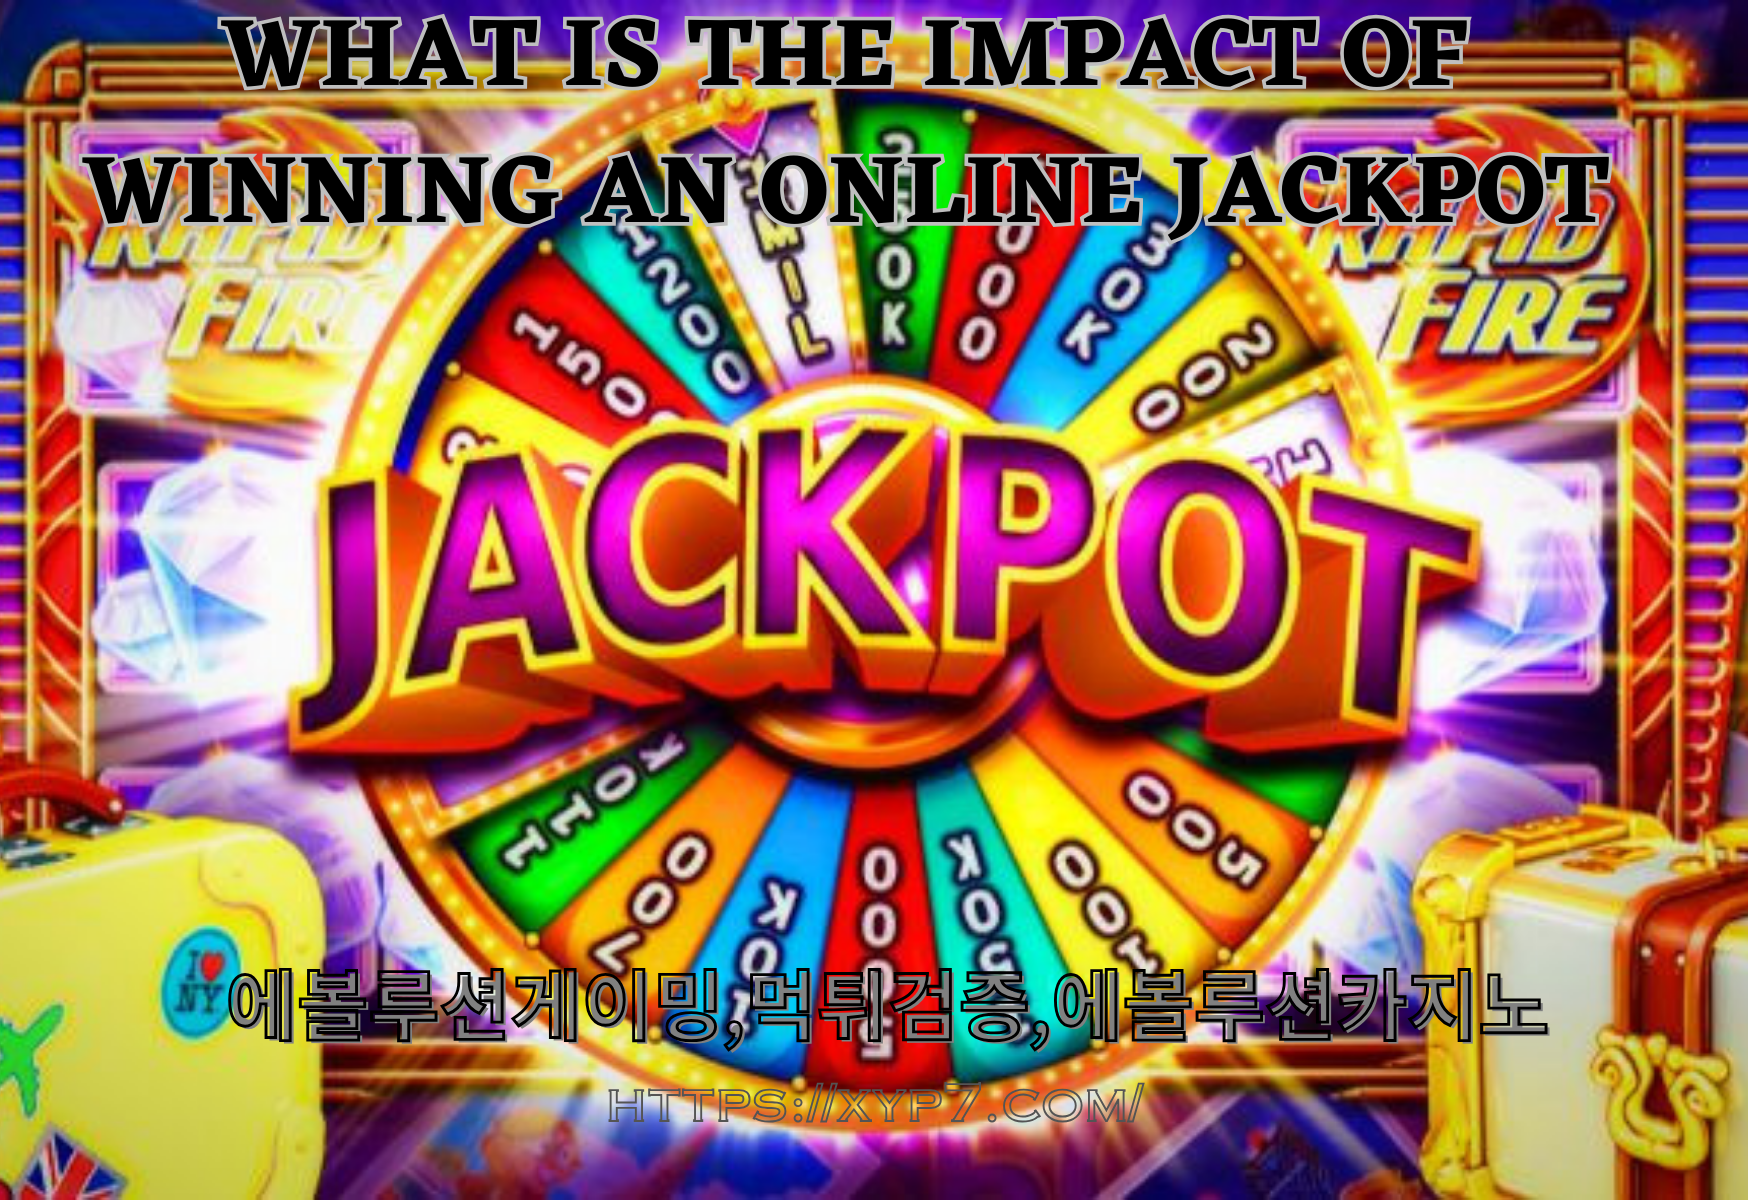 WHAT IS THE IMPACT OF WINNING AN ONLINE JACKPOT?